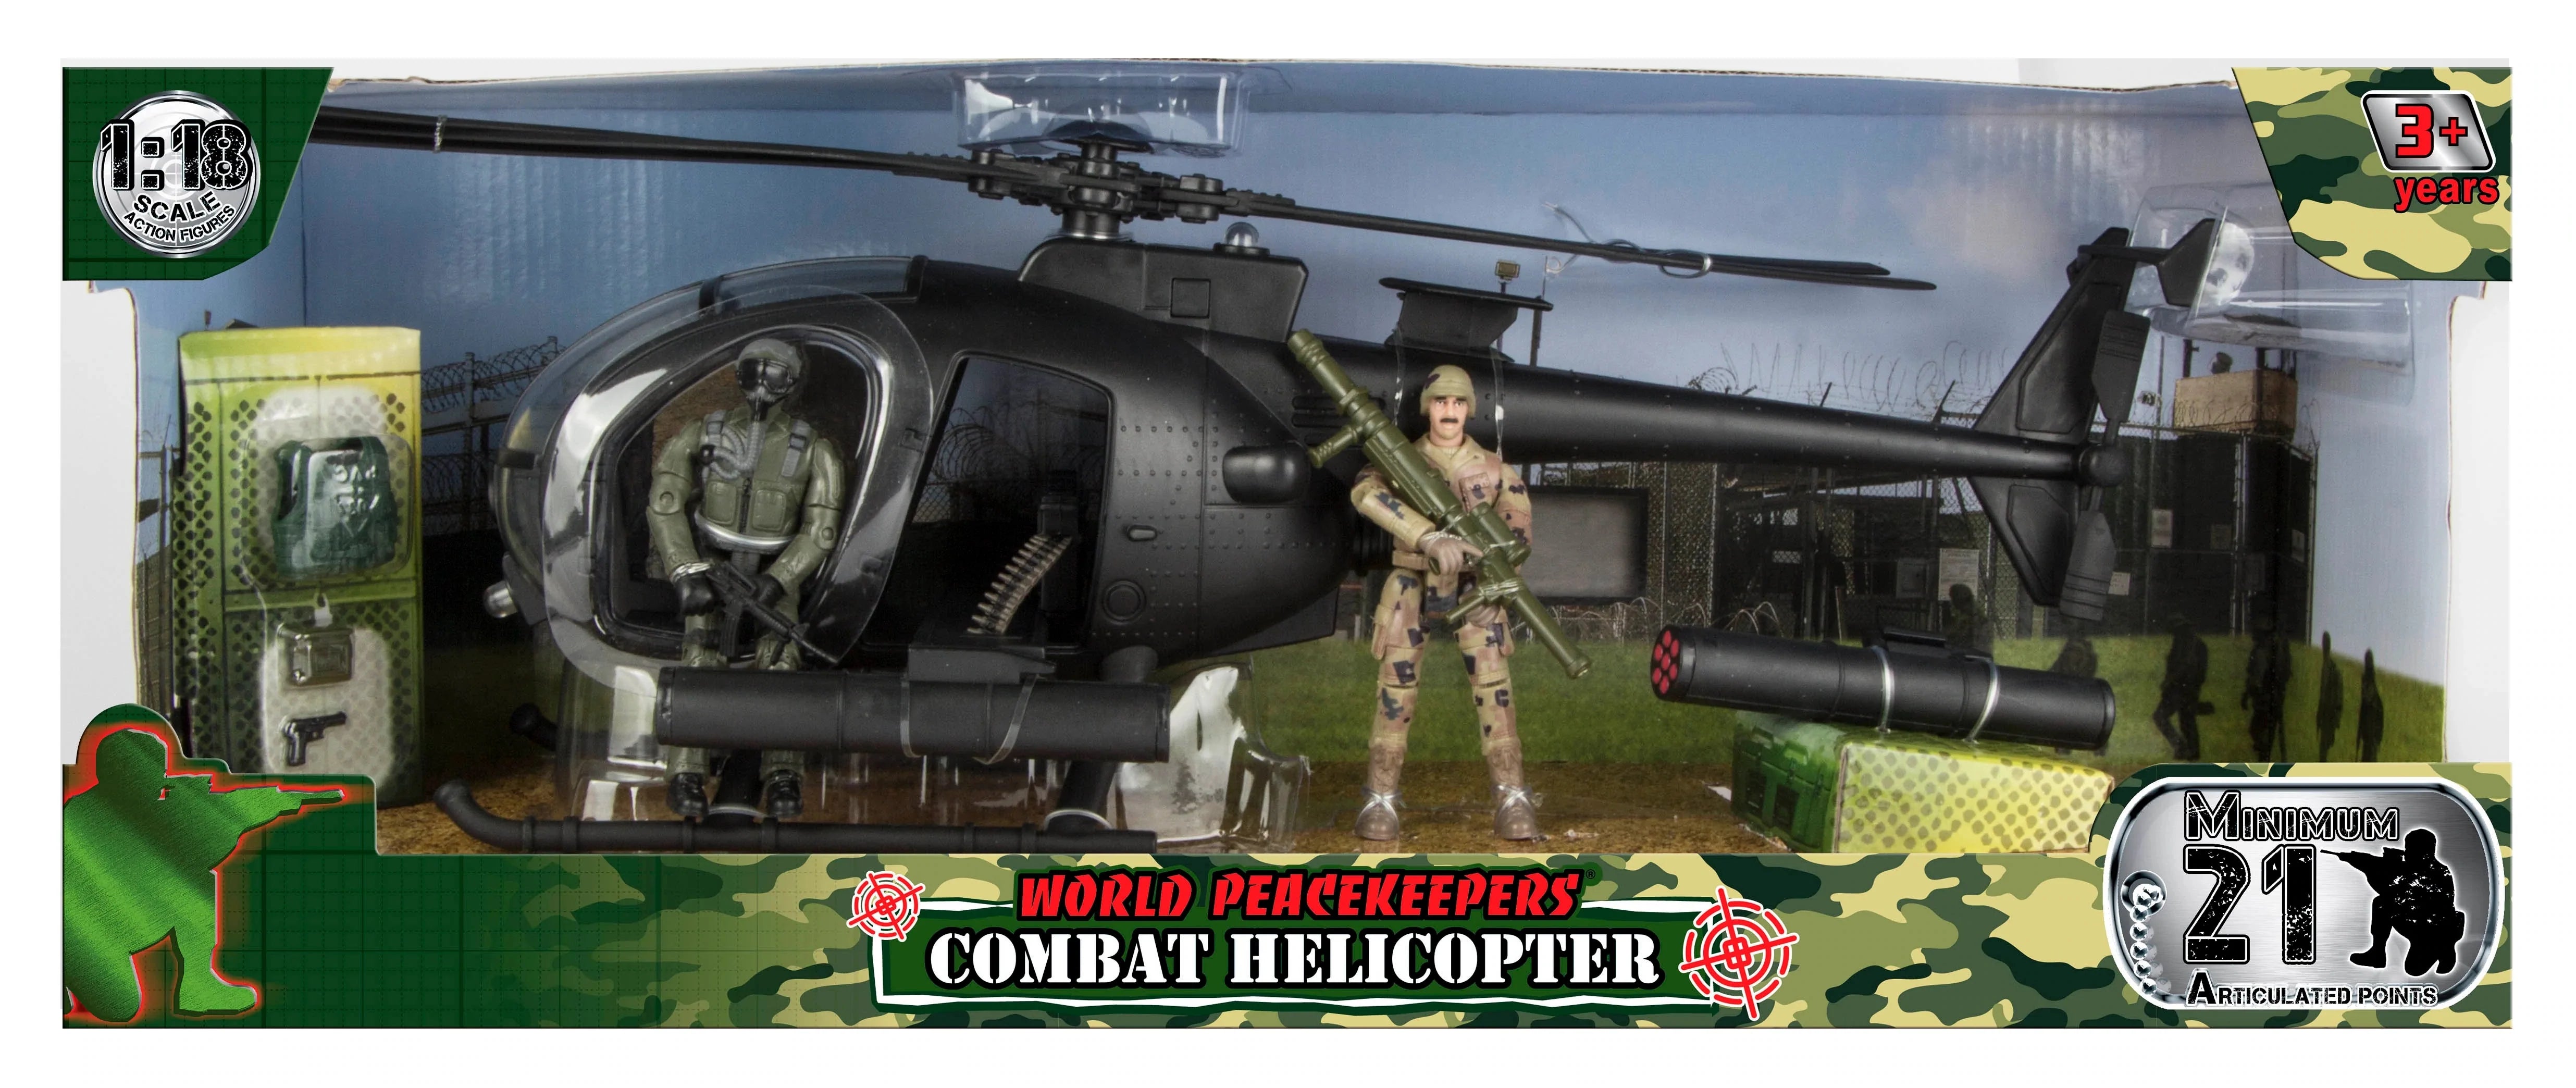 Combat Helicopter Peacekeepers